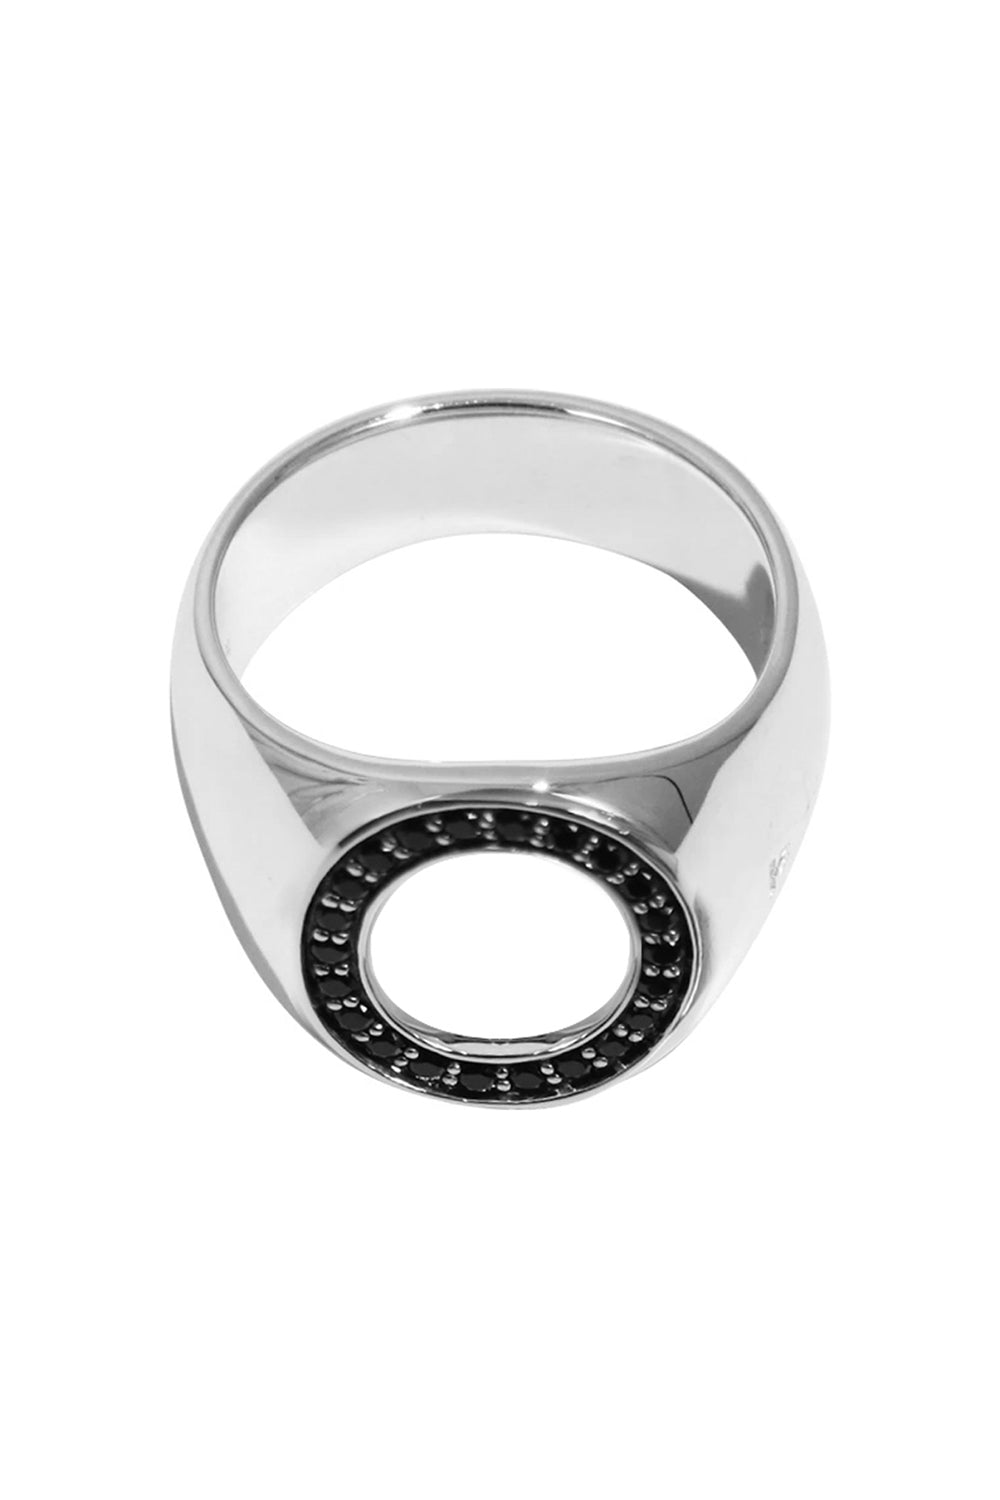 TOM WOOD JEWELLERY OPEN OVAL RING BLACK SPINEL SILVER